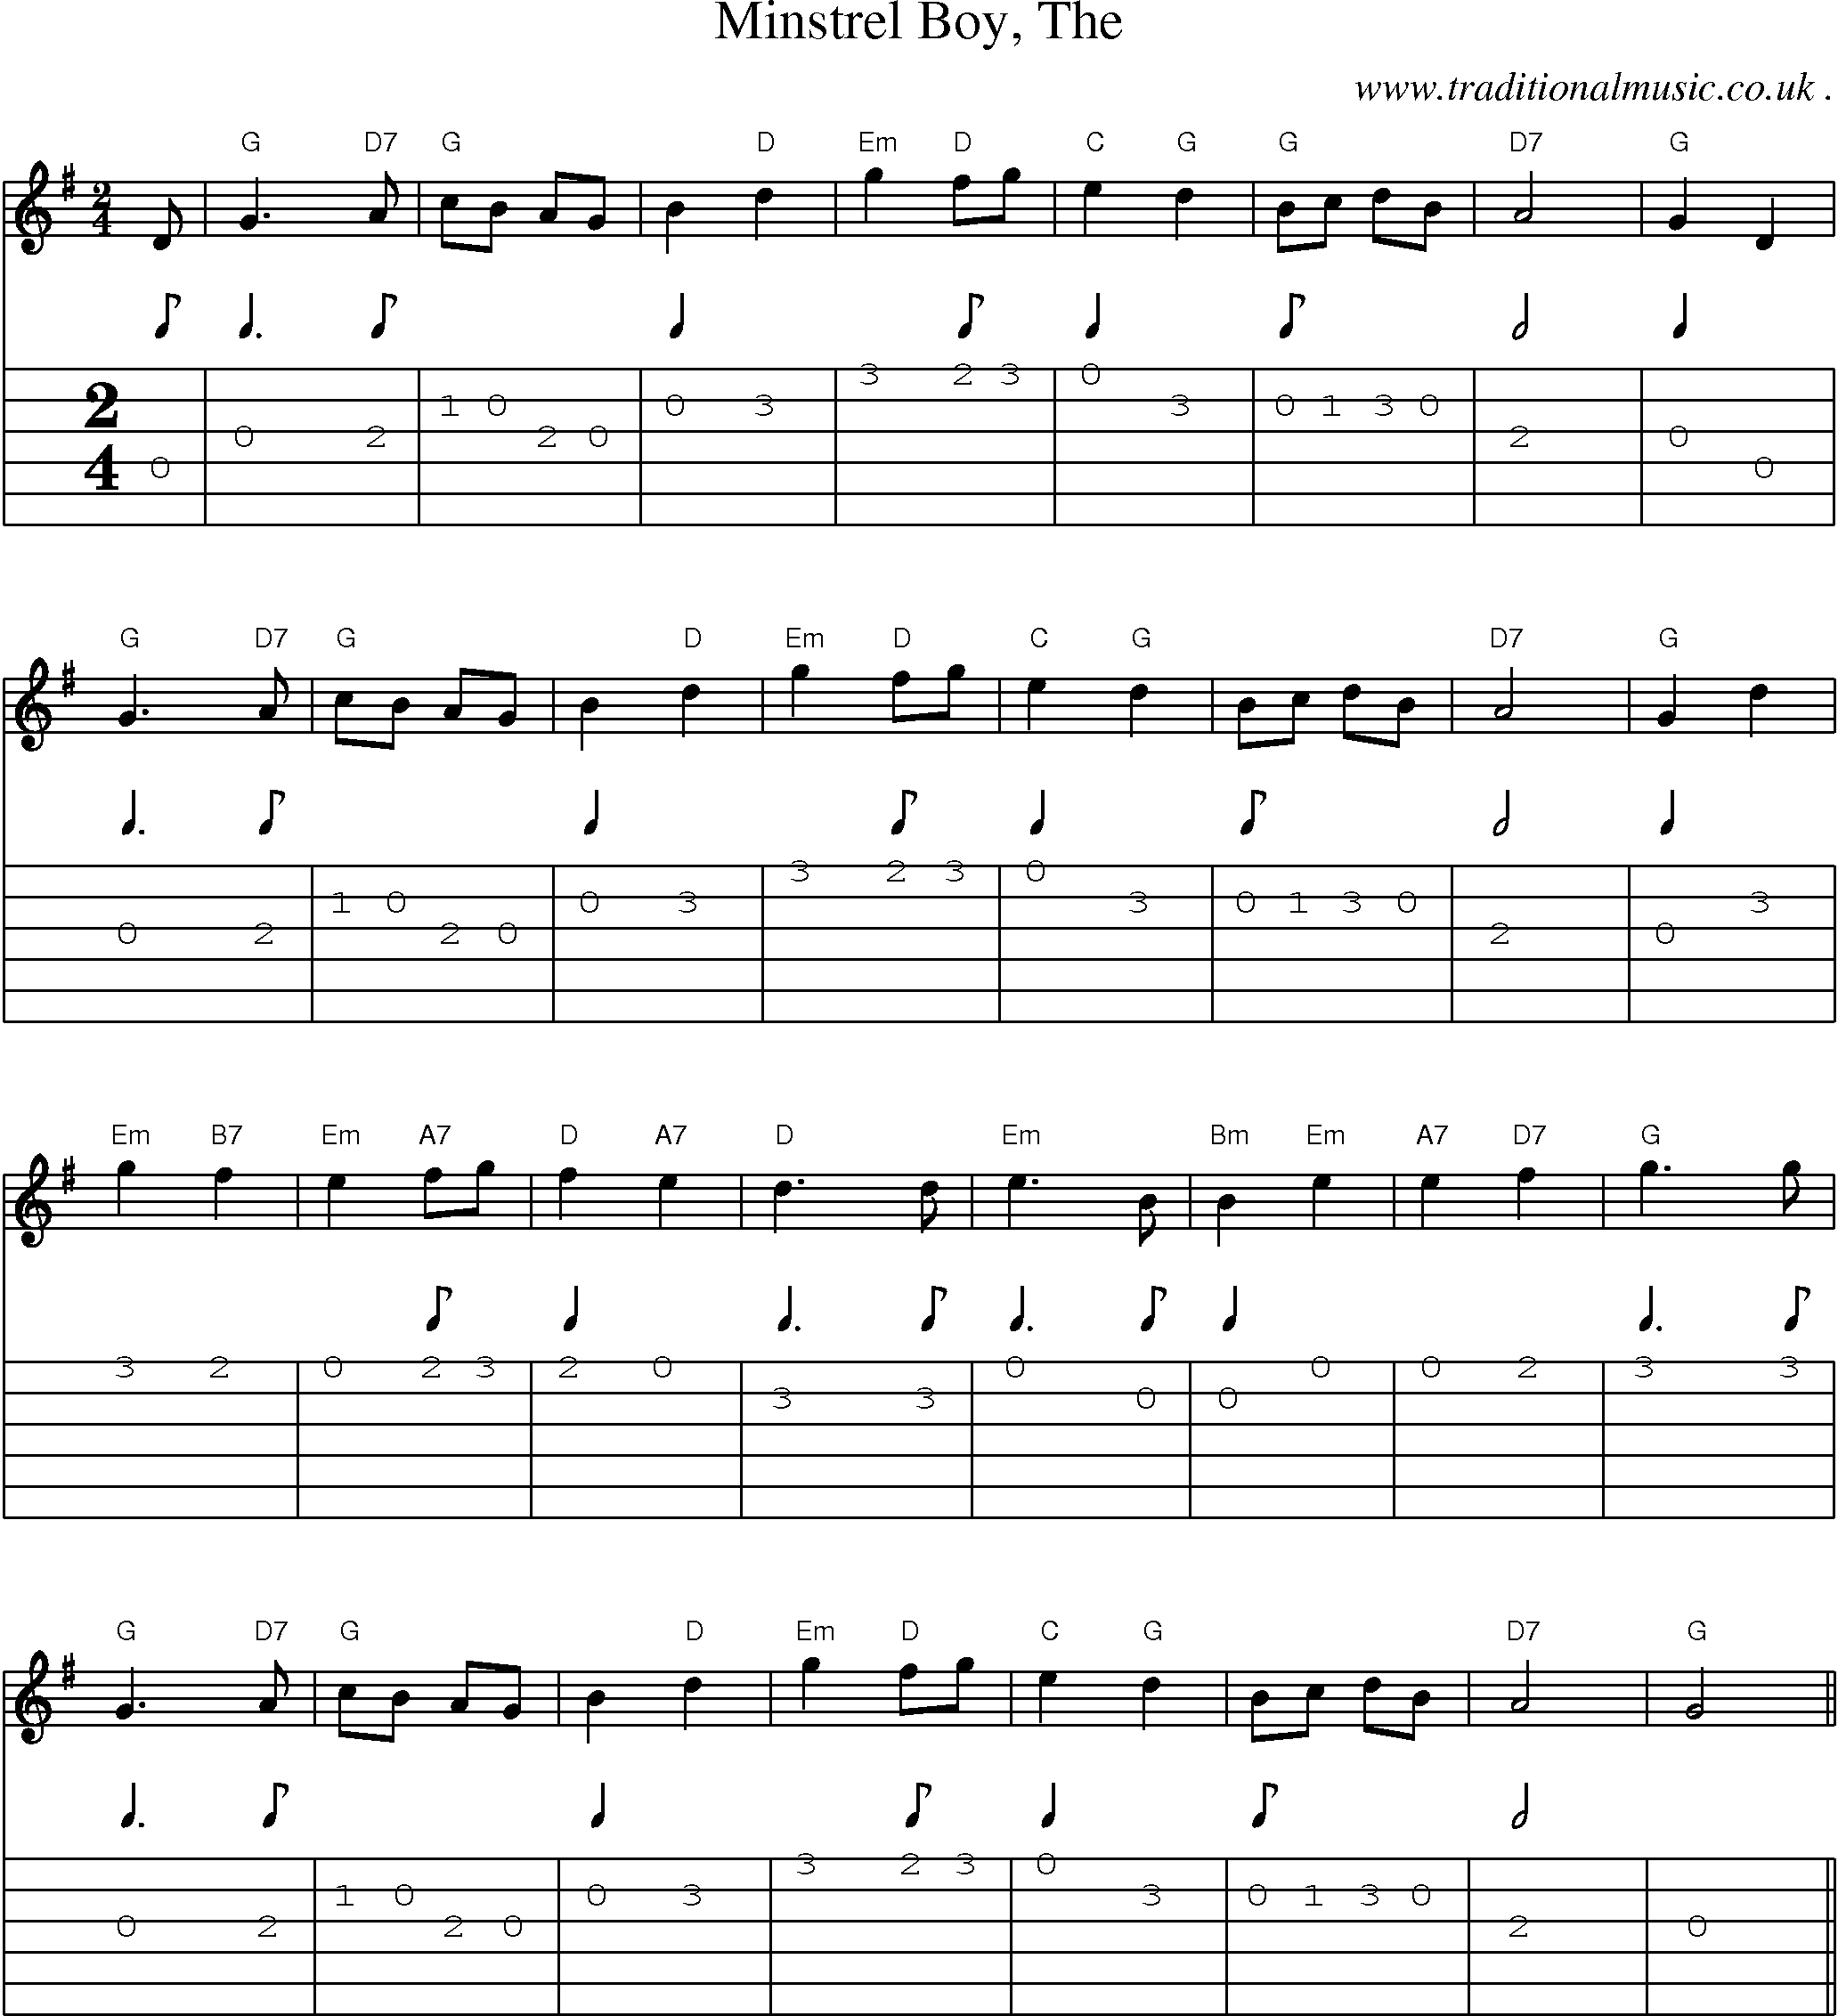 Music Score and Guitar Tabs for Minstrel Boy The